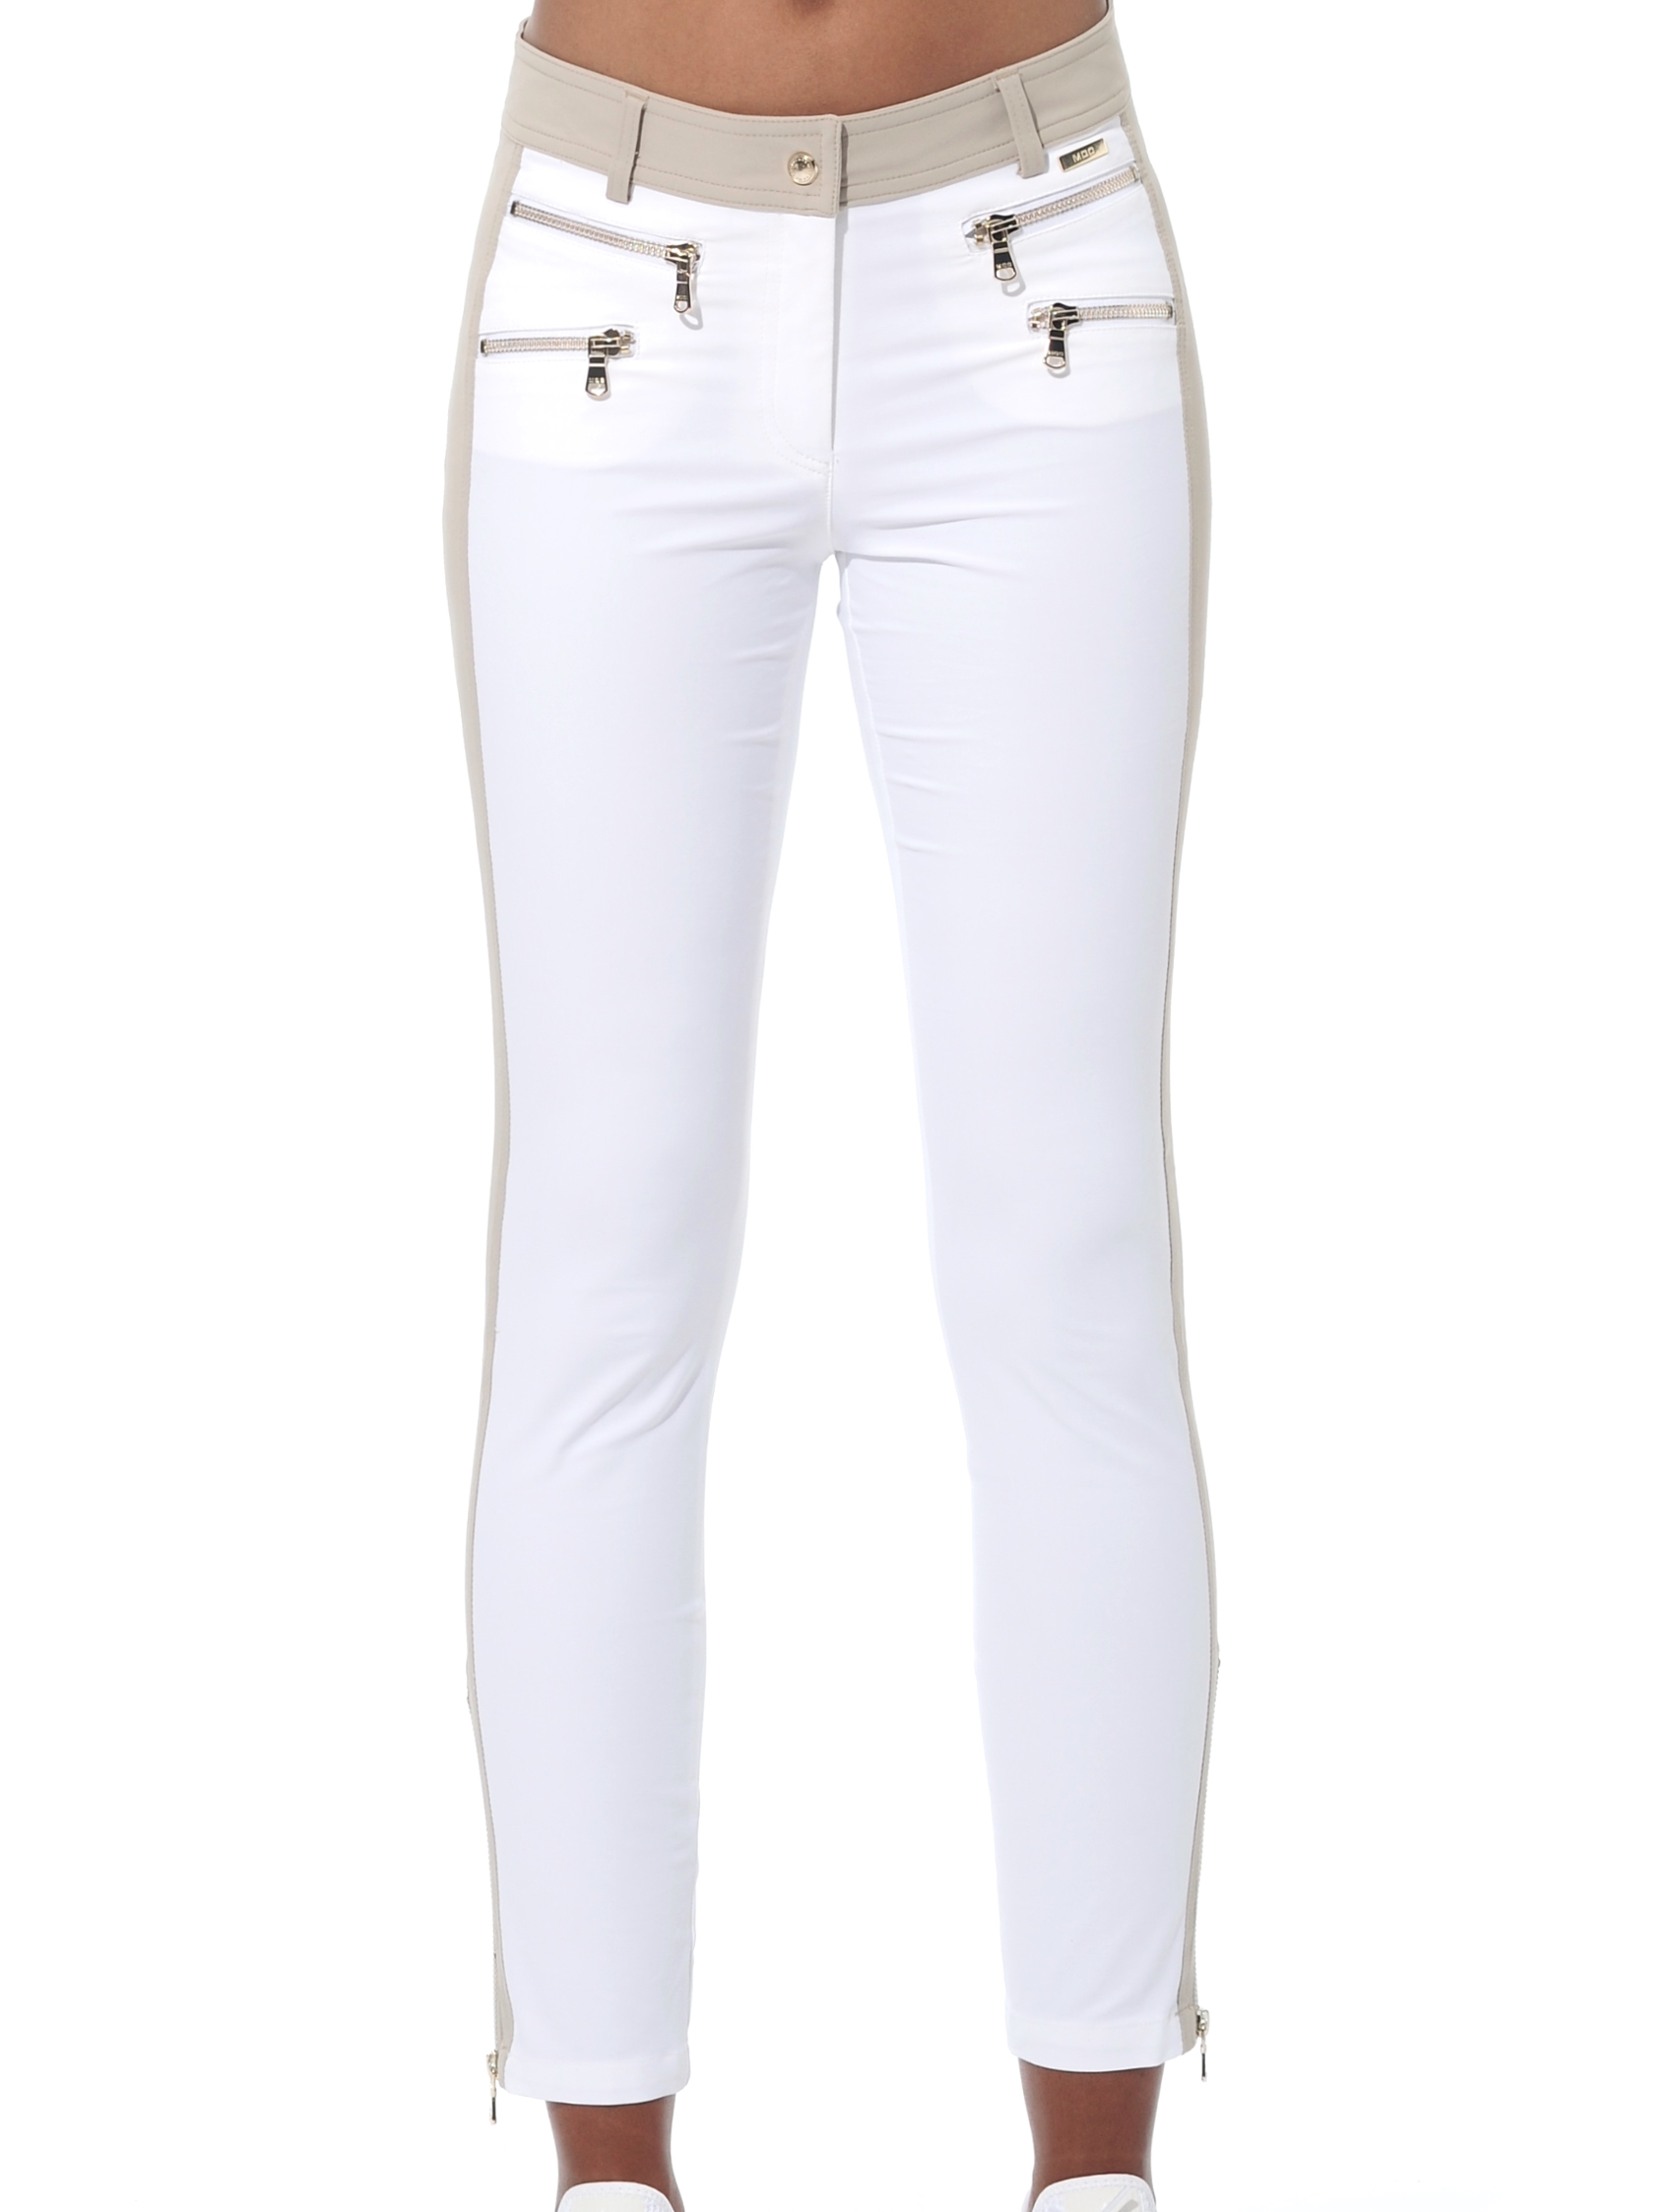 4way stretch double zip ankle pants white/light taupe 